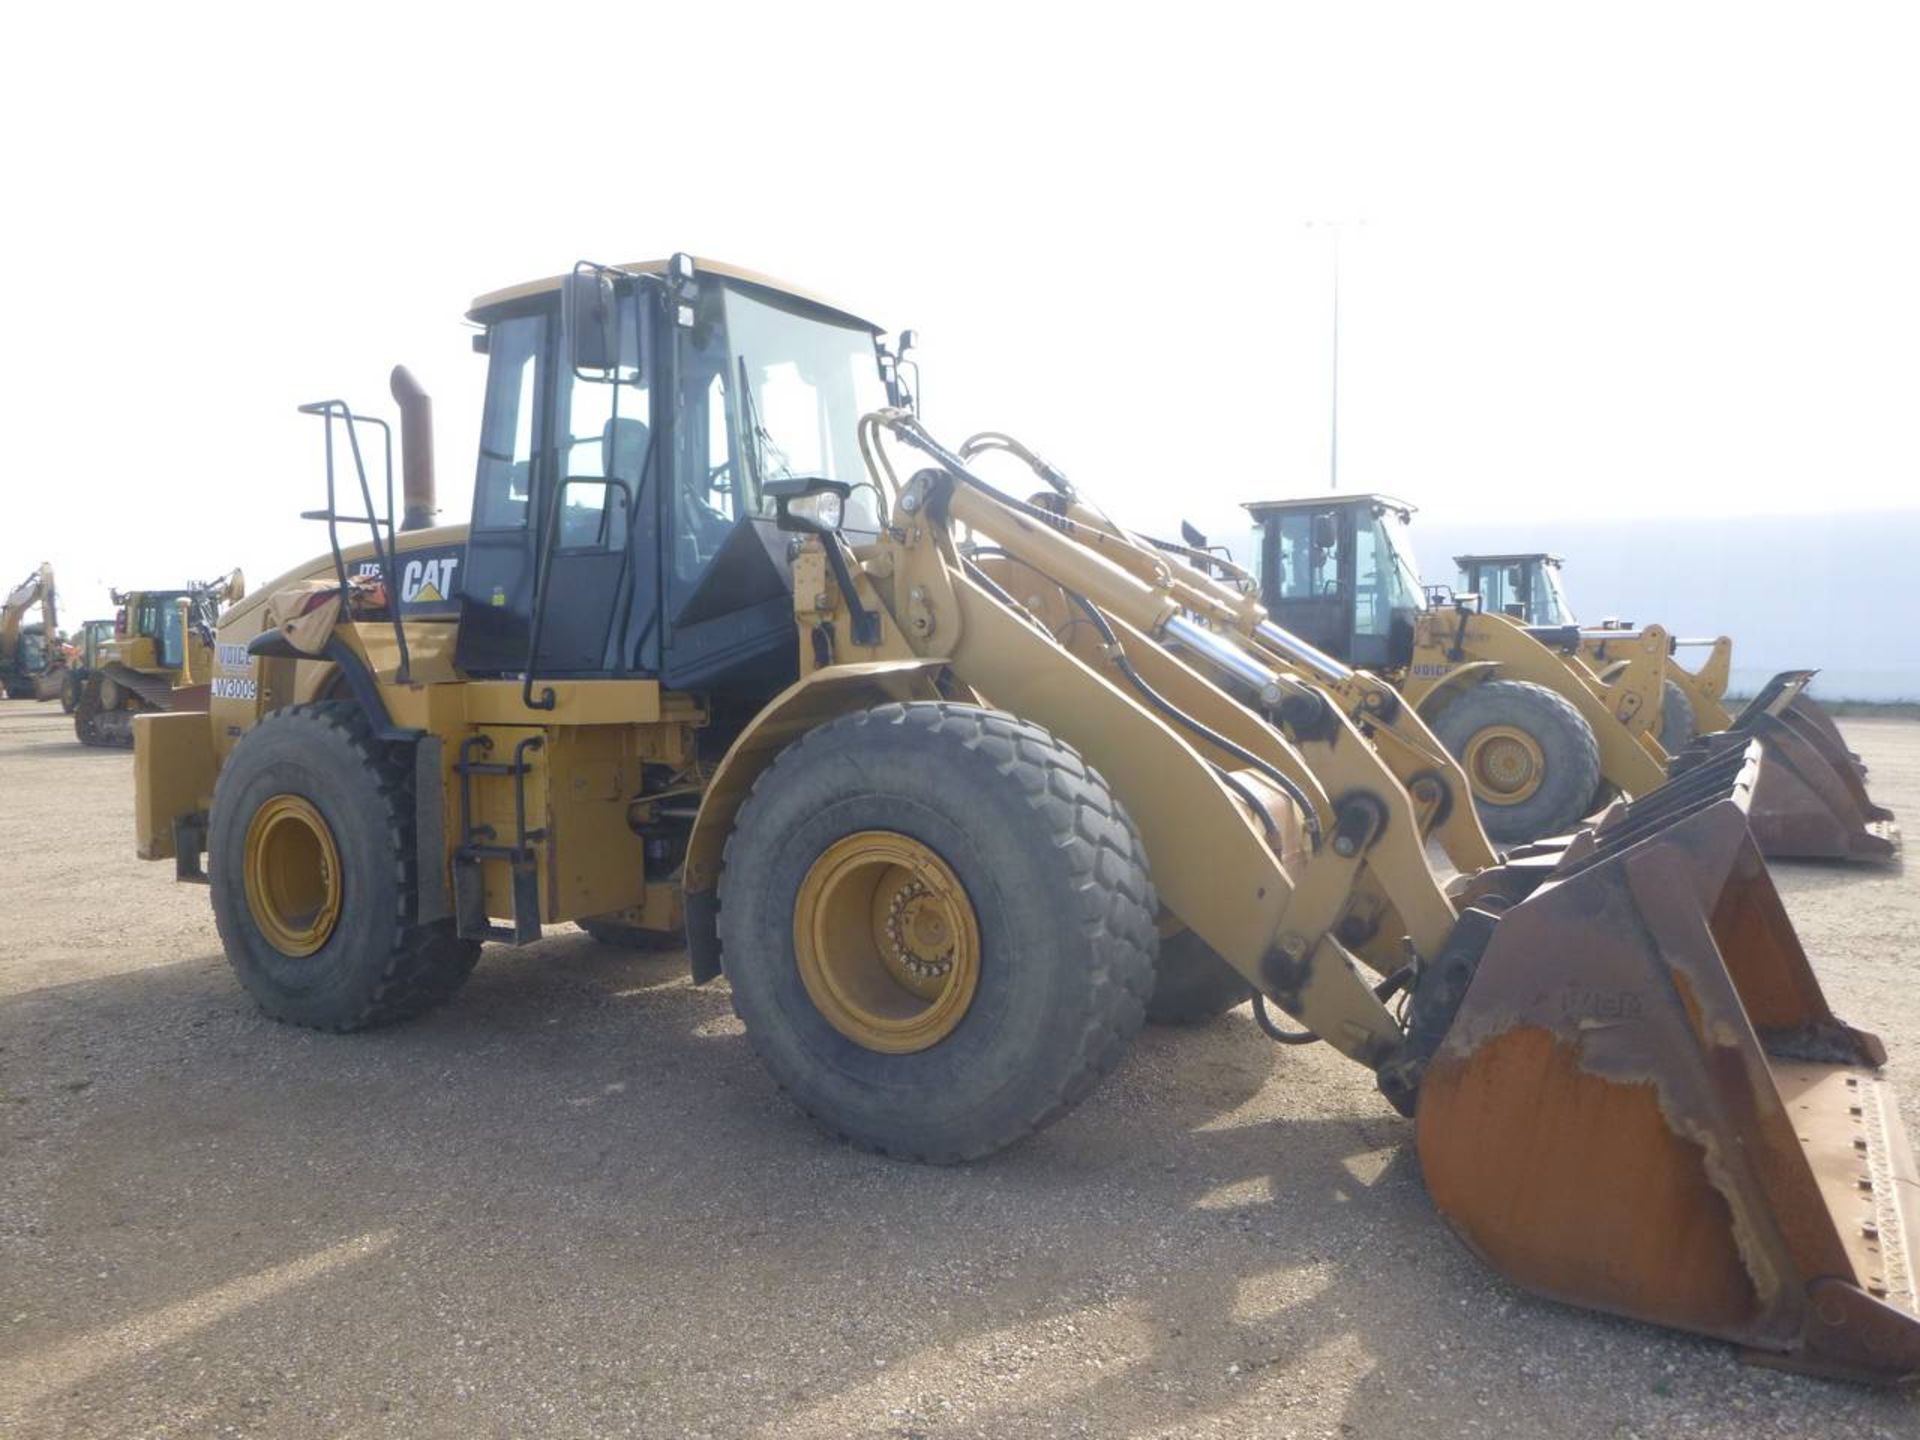 2011 Caterpillar IT62H Front End Loader - Image 2 of 8